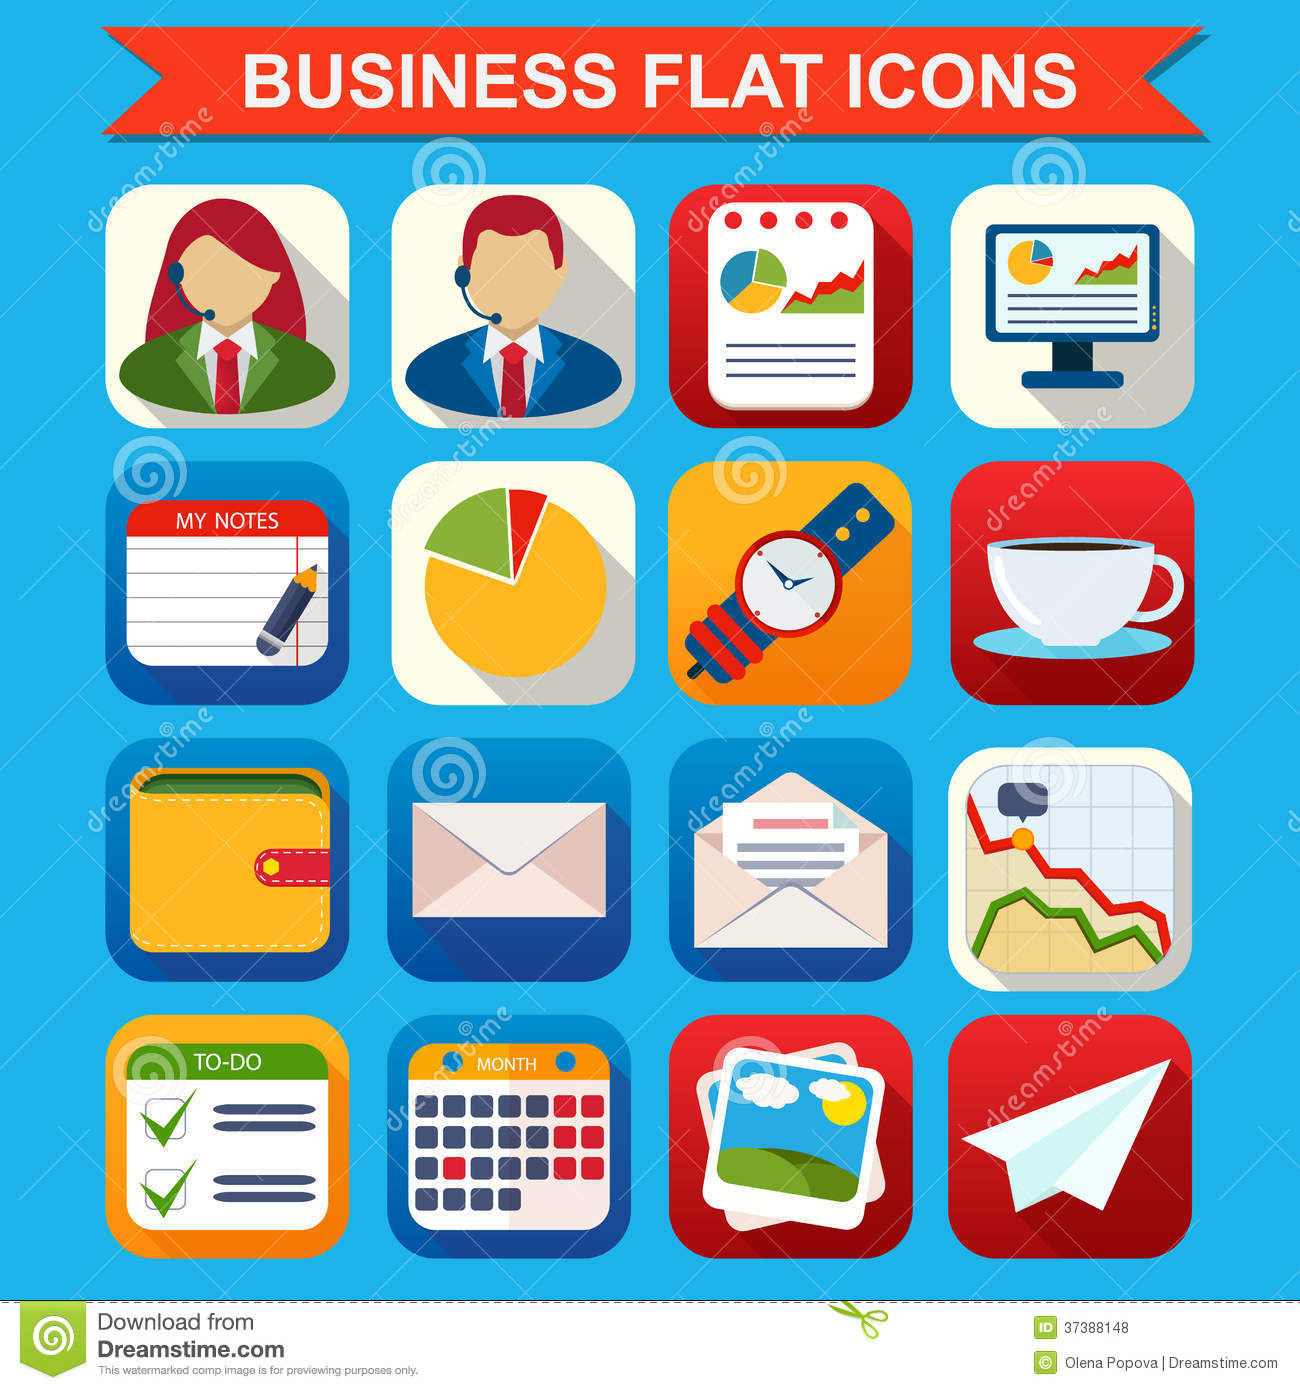 Flat Business Icons Vector Free